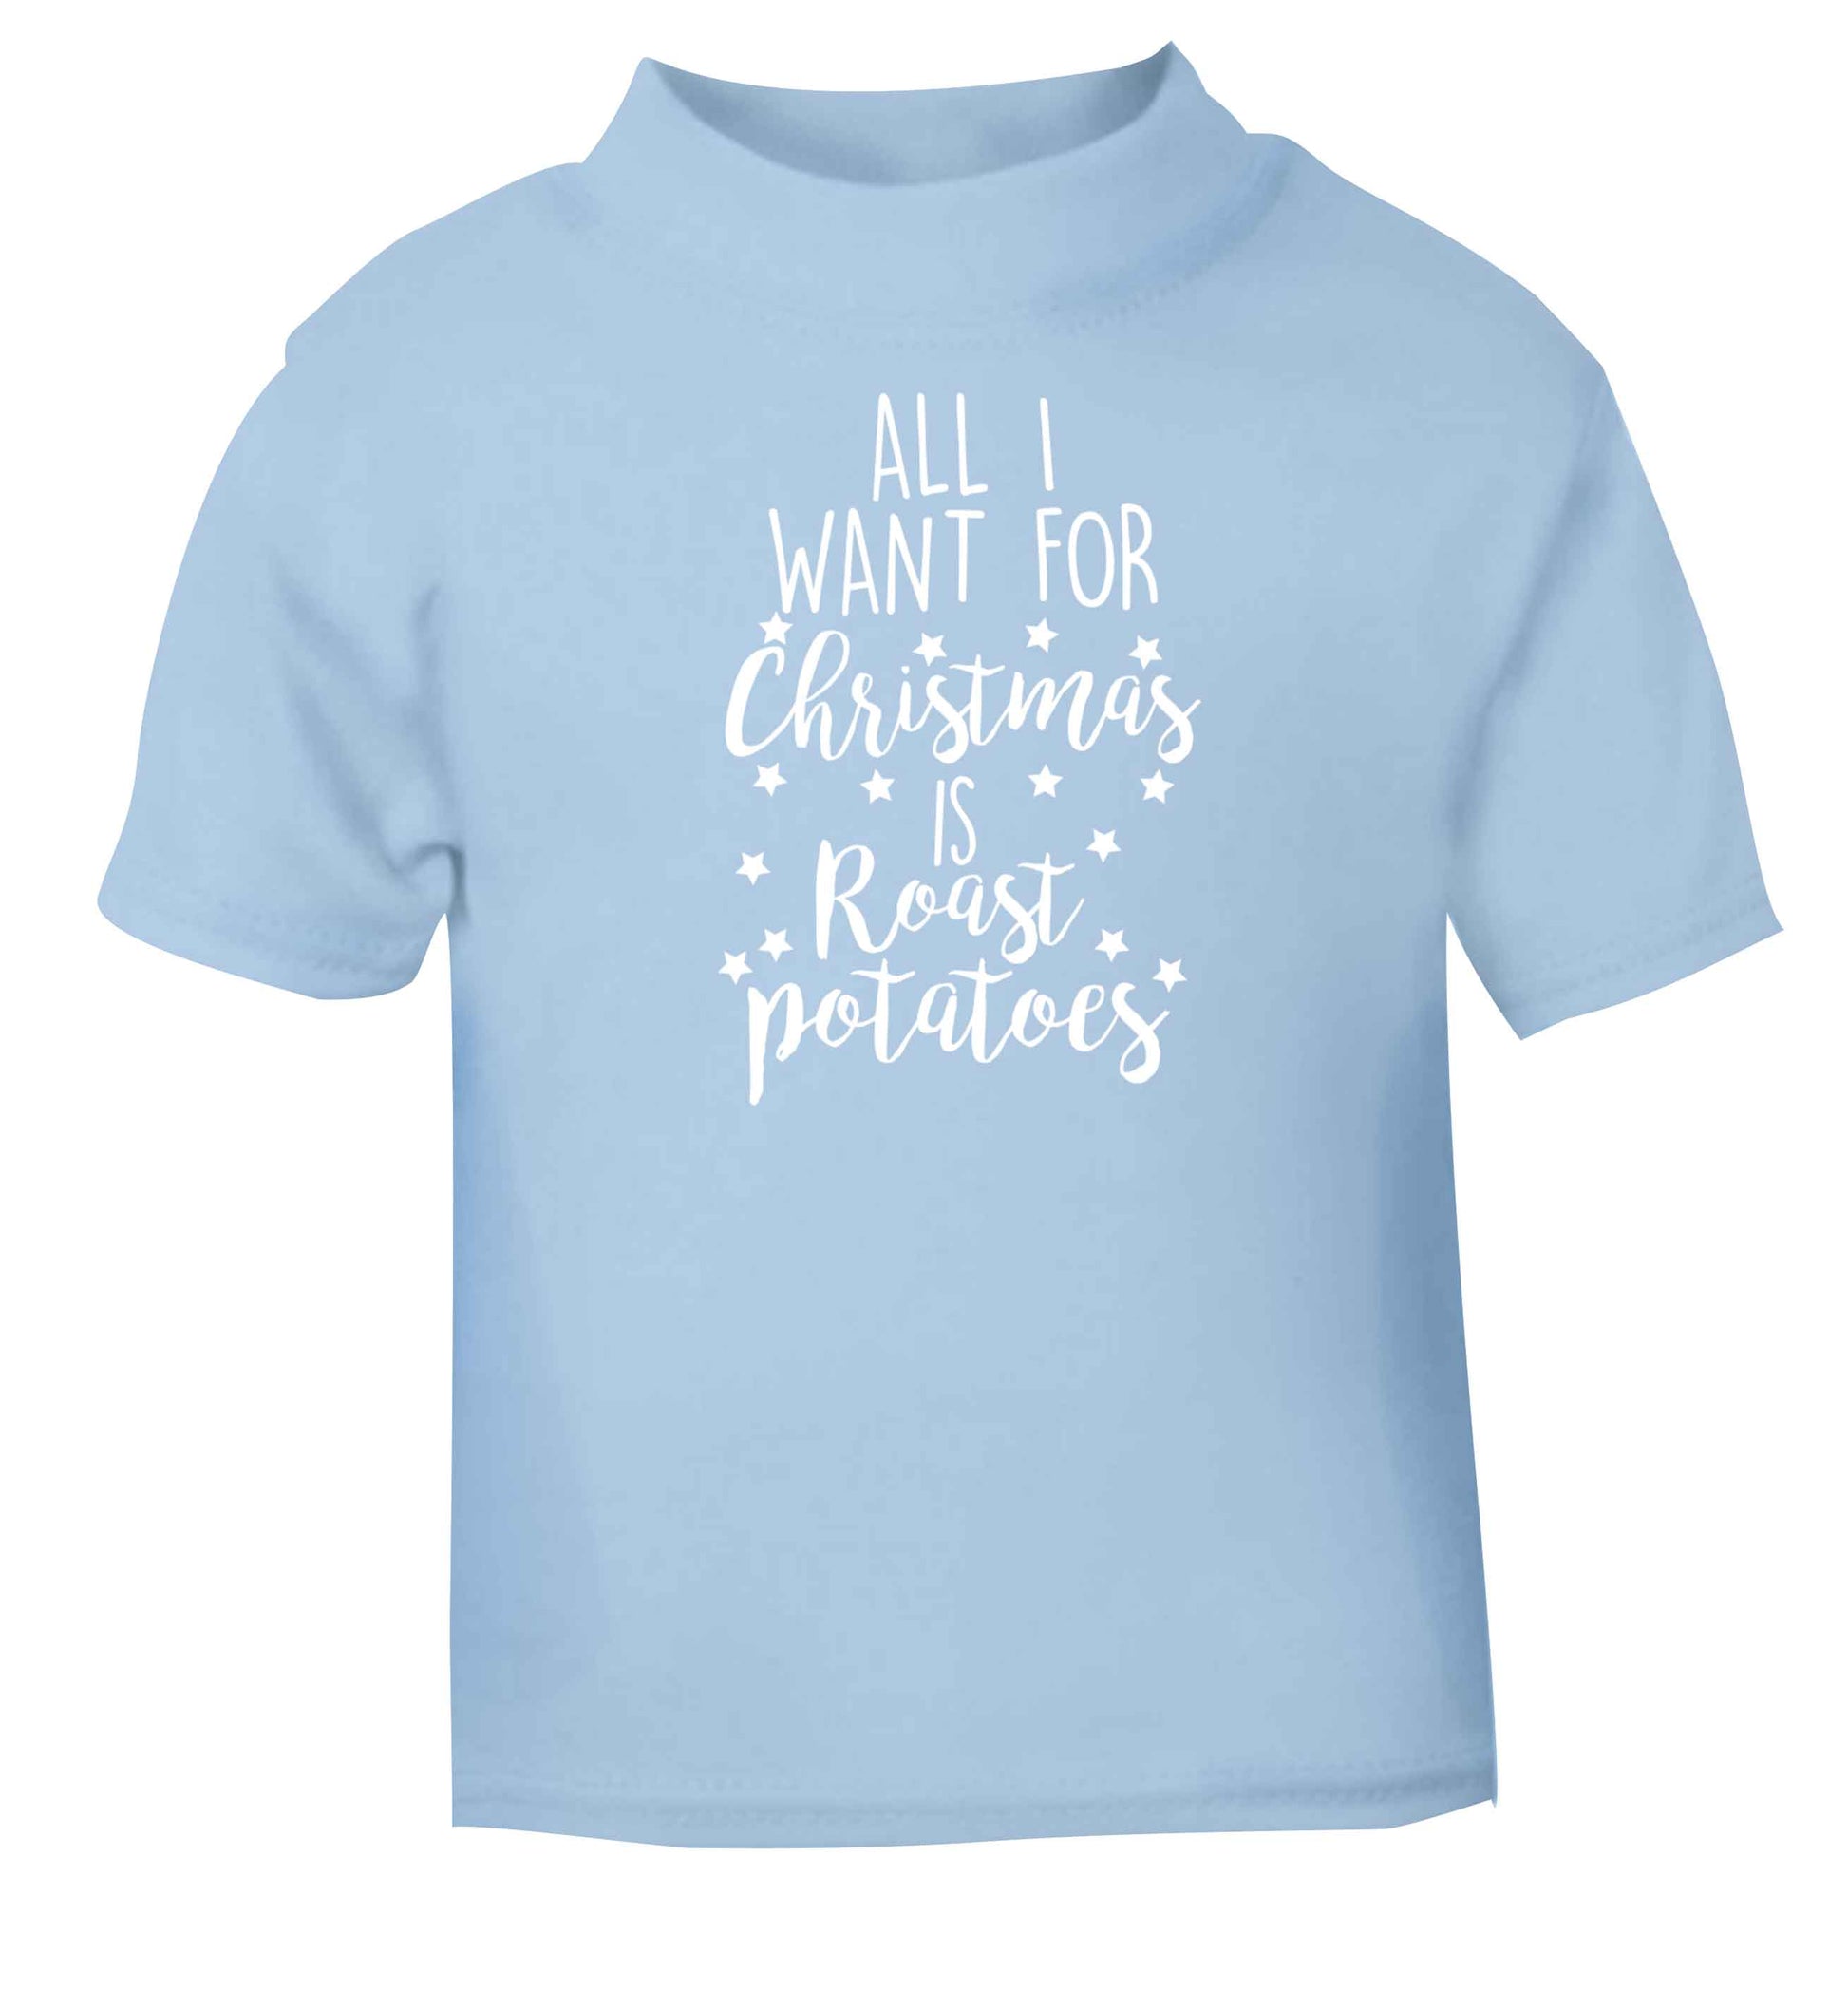 All I want for Christmas is roast potatoes light blue baby toddler Tshirt 2 Years